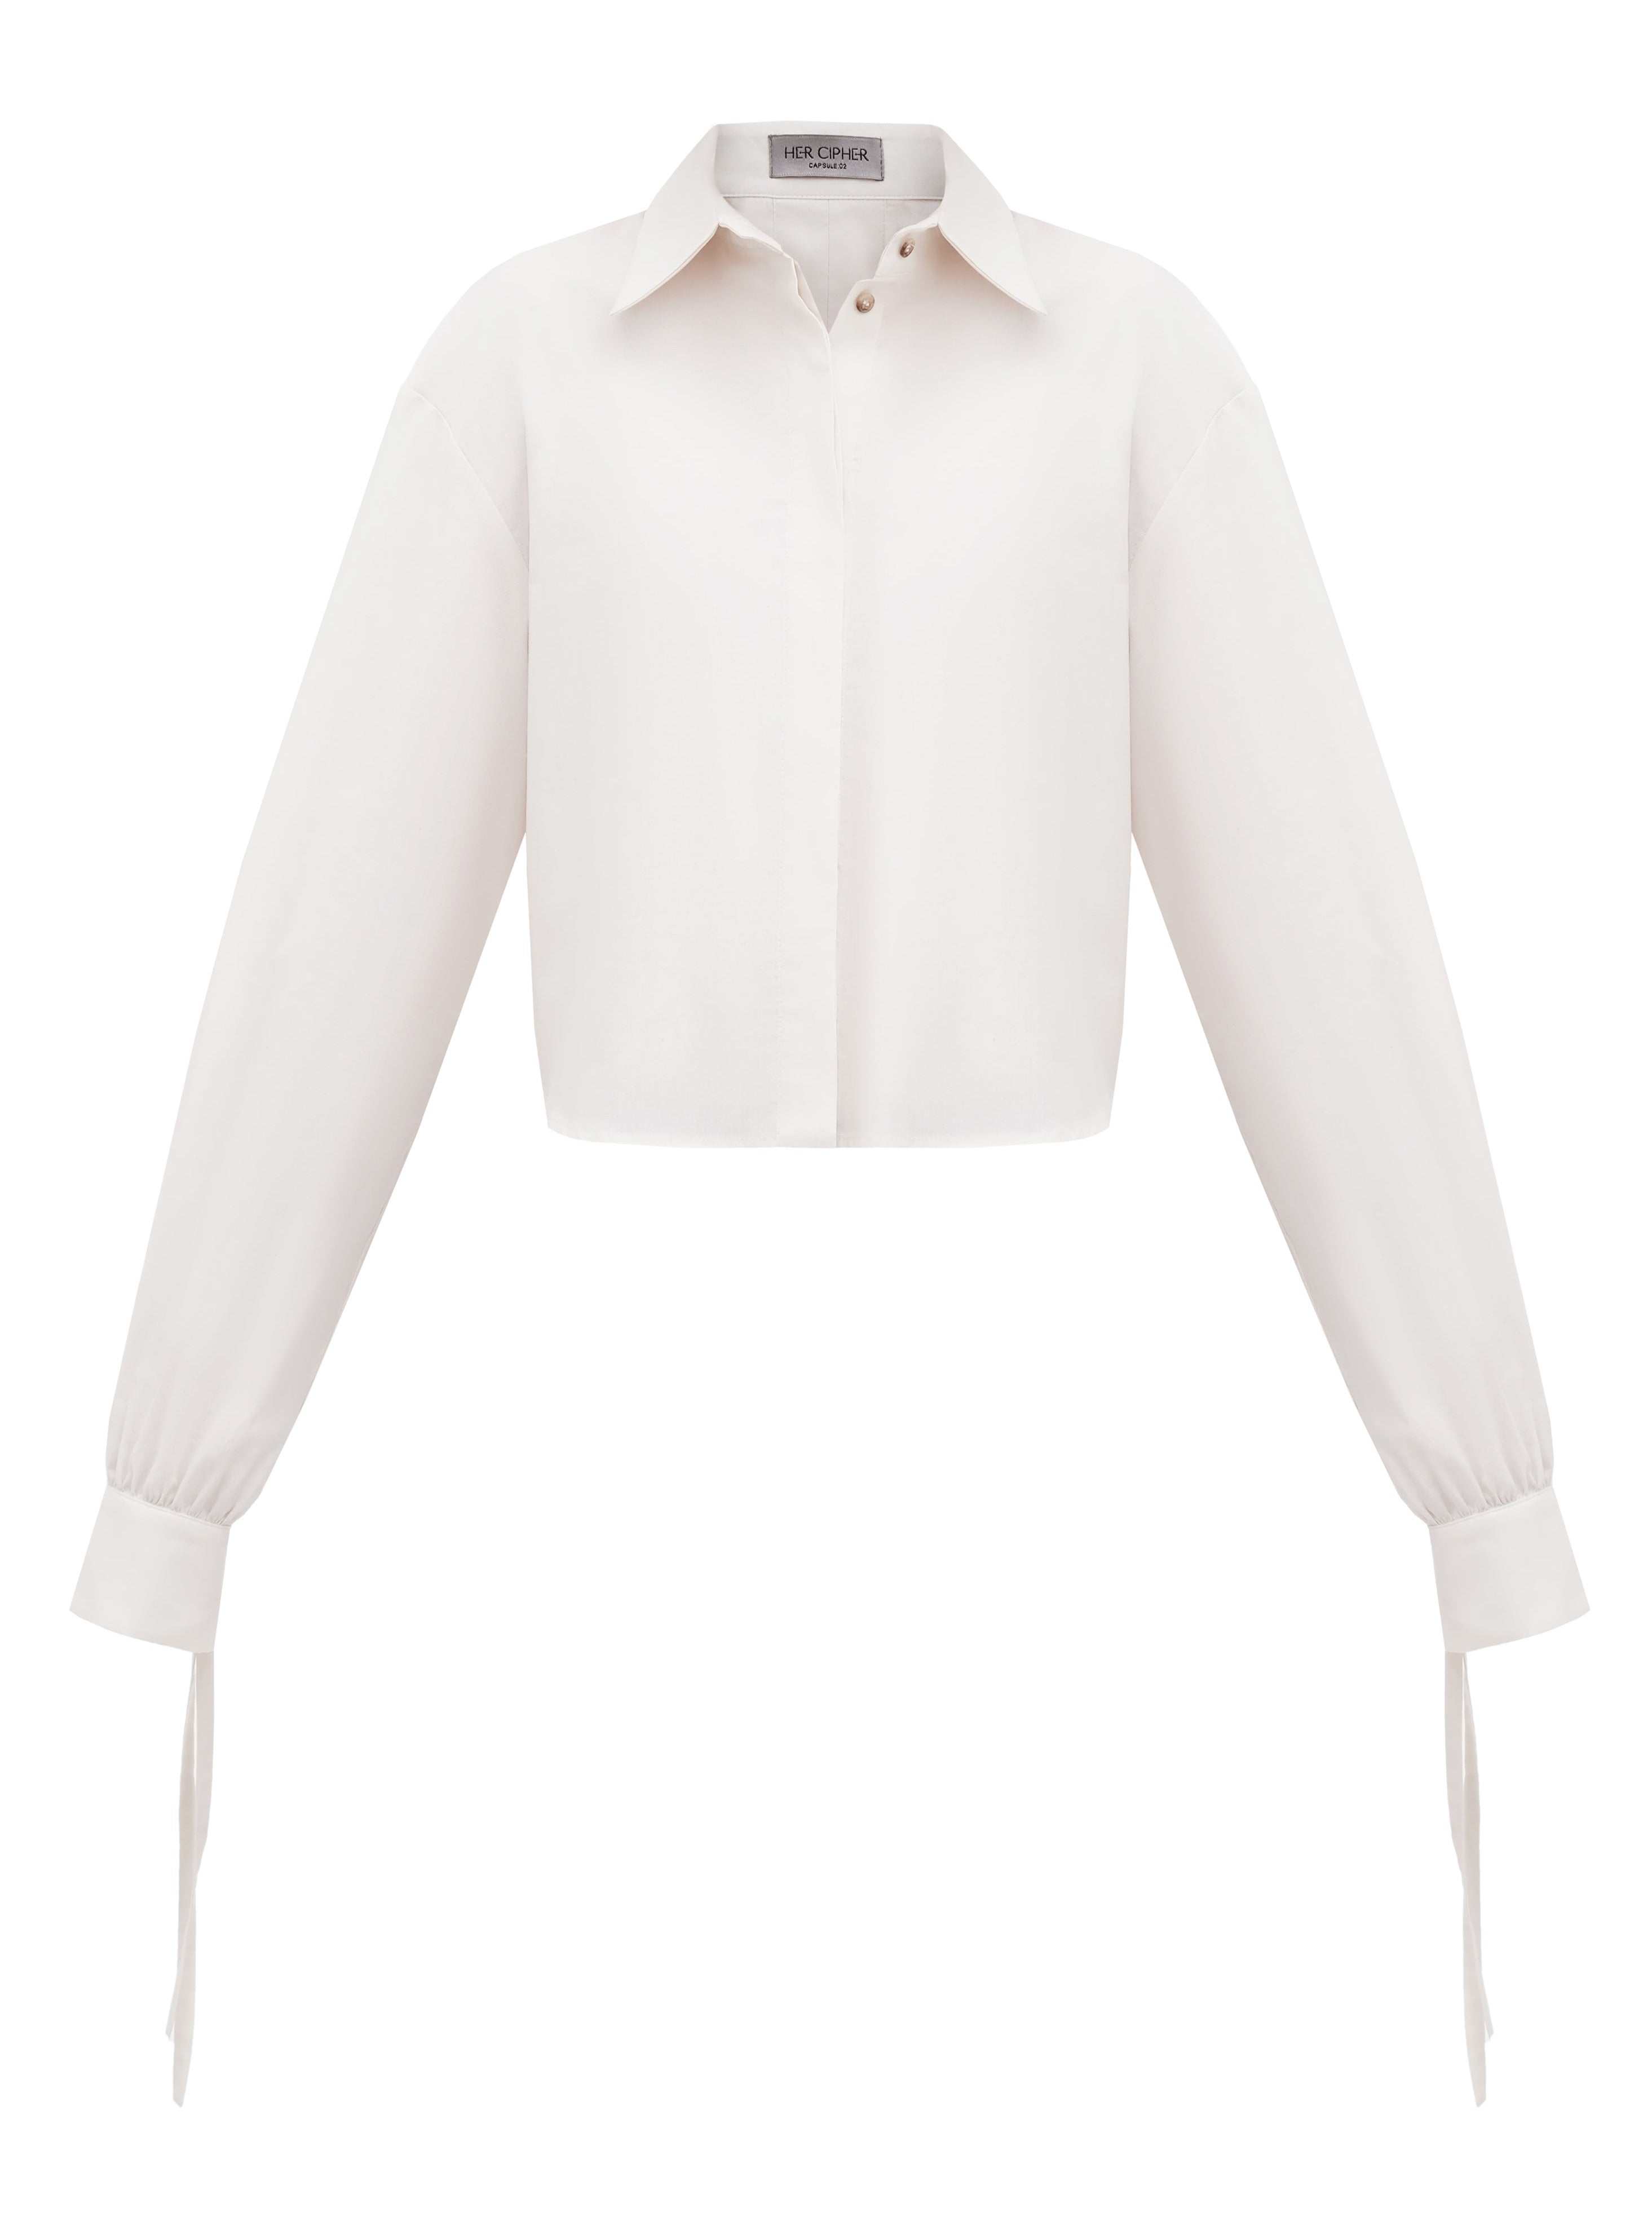 An organic cotton sustainable shirt in light ivory color